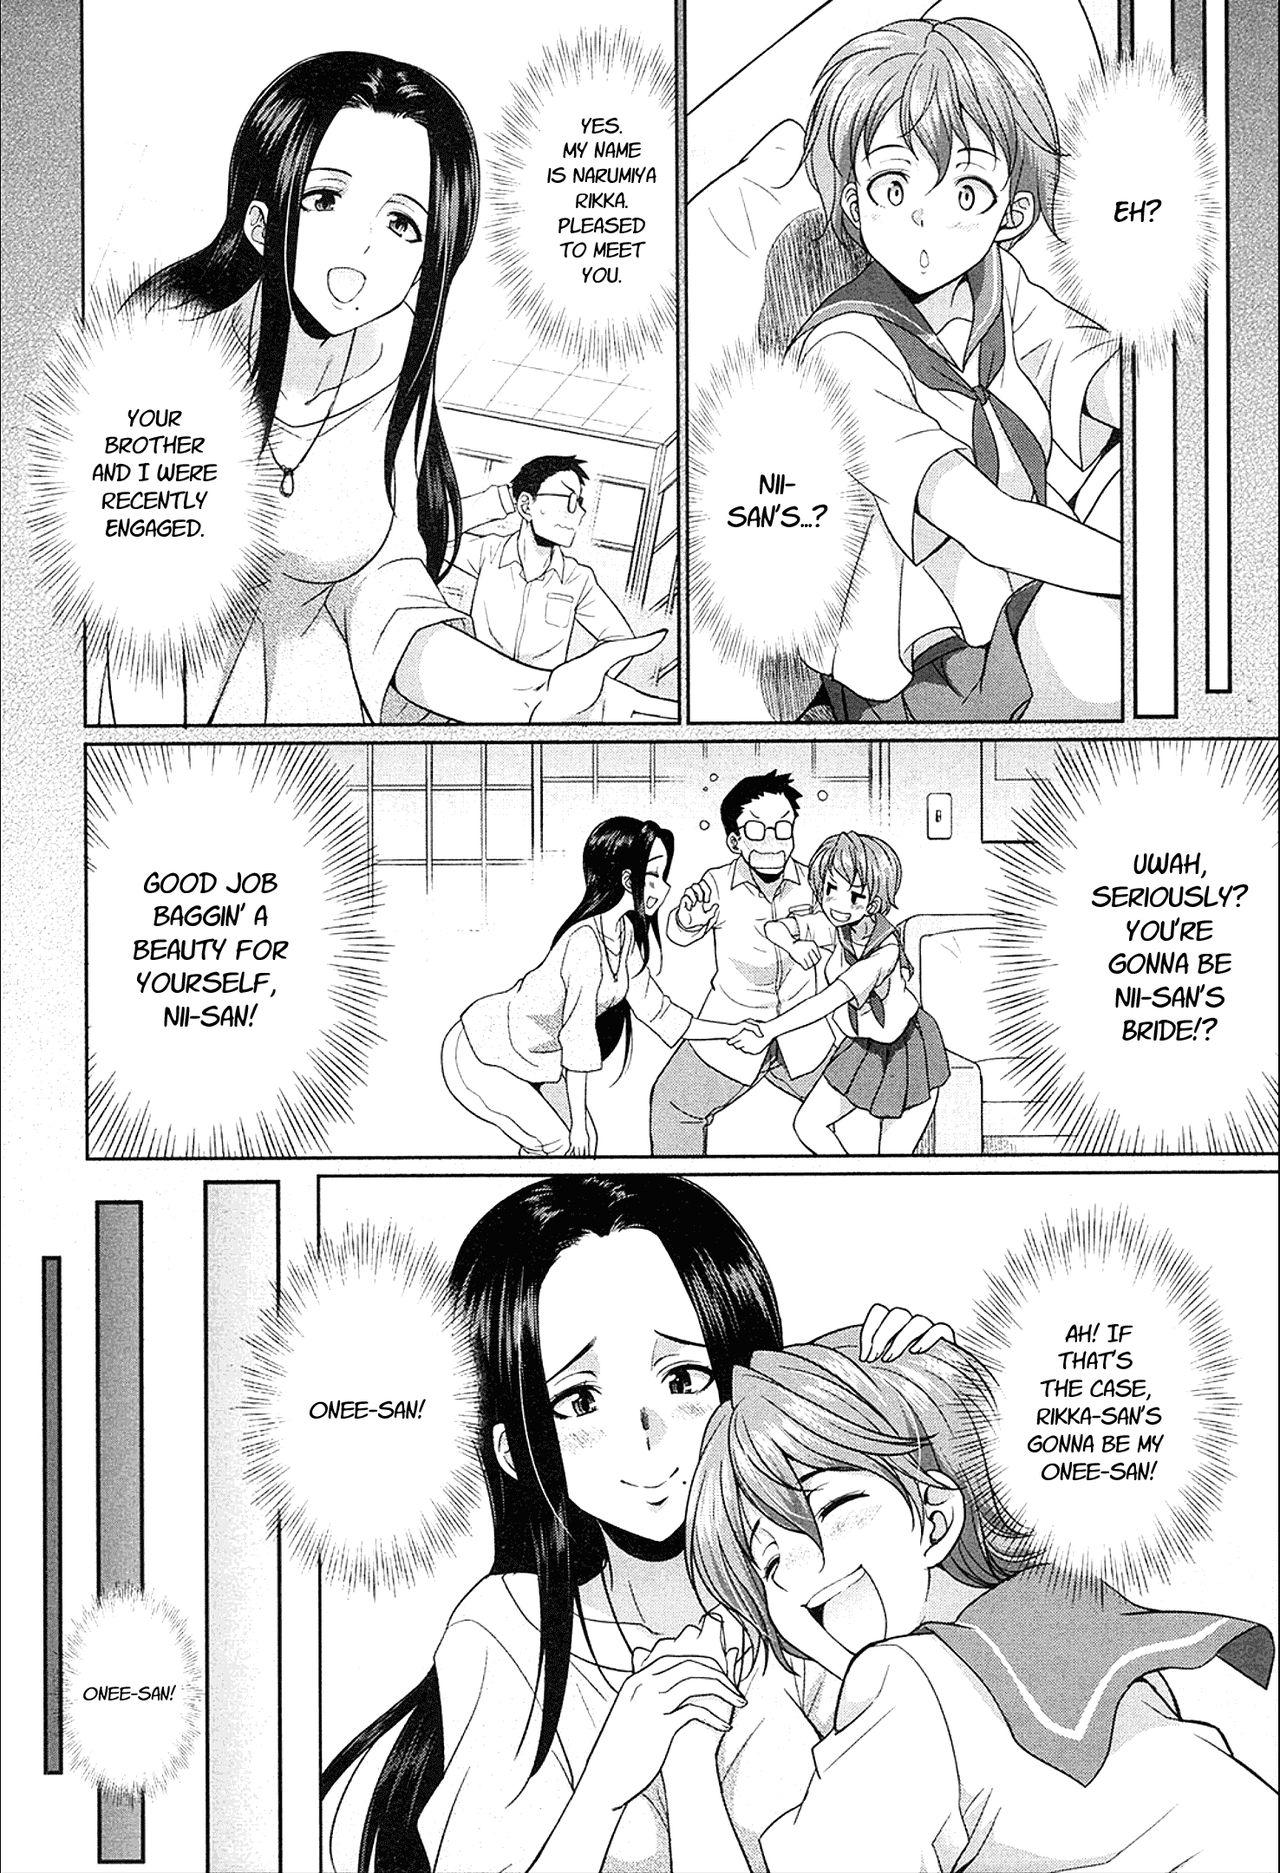 Tight Ass Gishimai no Kankei The Relationship of the Sisters-in-Law Original Script Uncensored Fucking Hard - Page 4